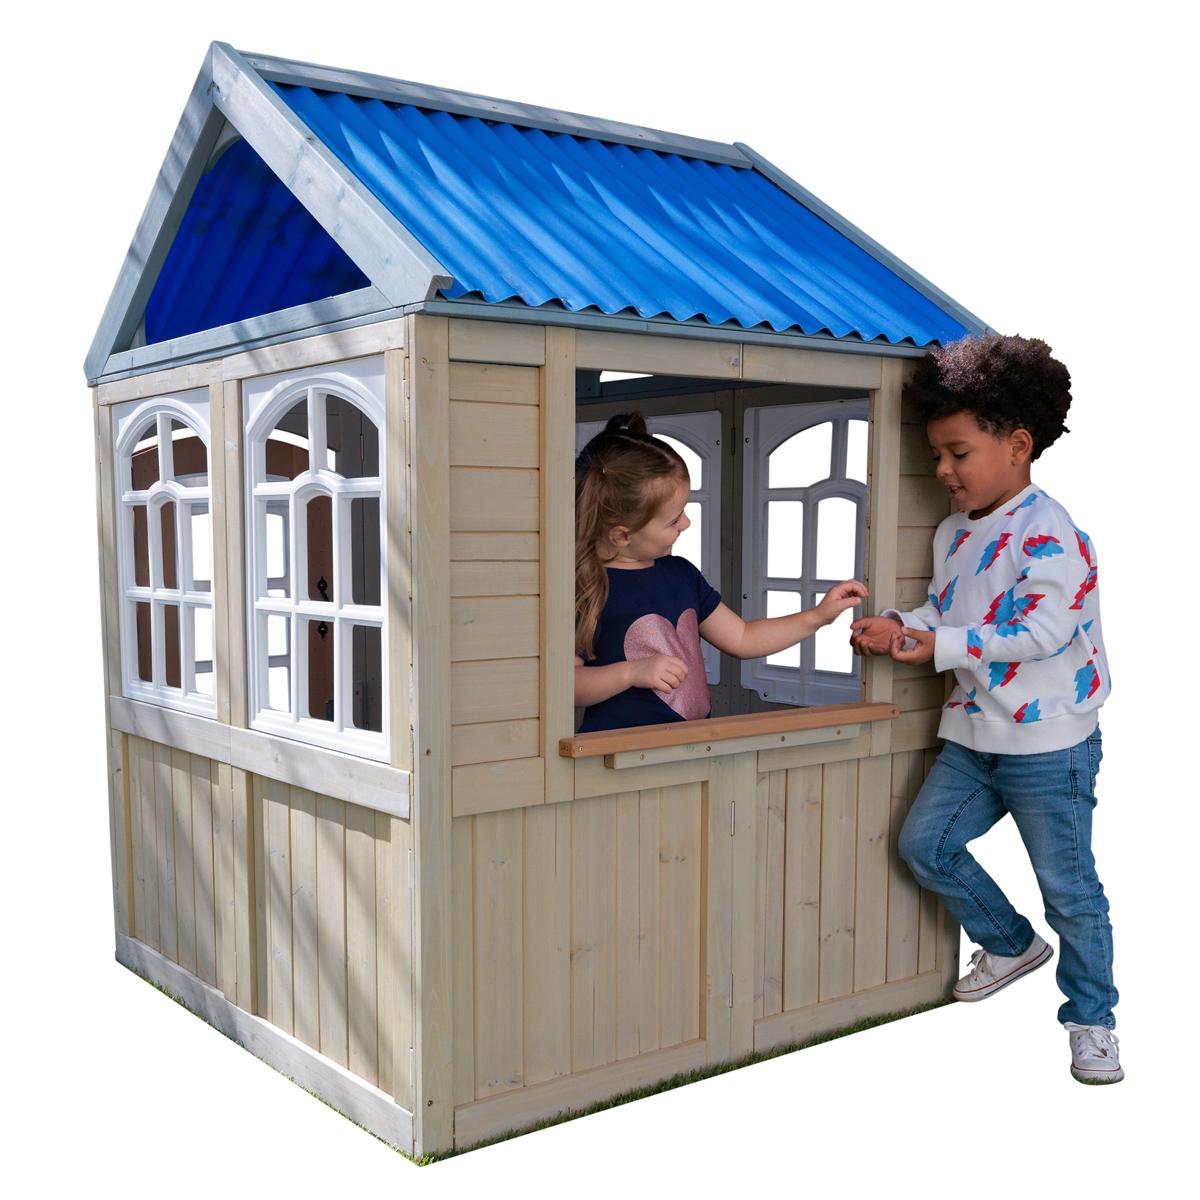 KidKraft Cooper Playhouse for $129 Shipped